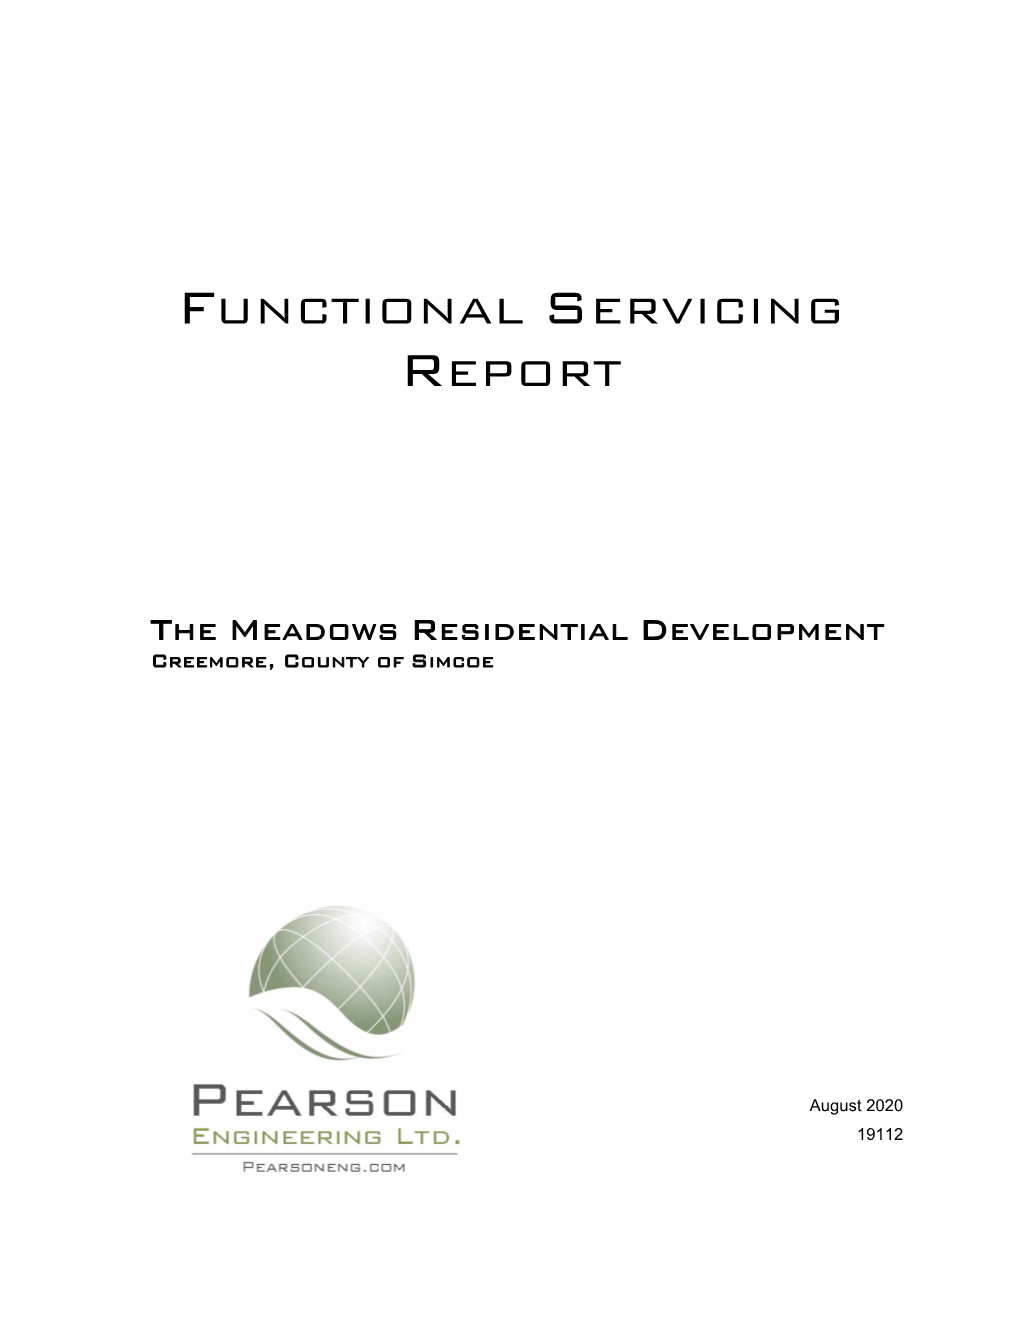 Functional Servicing Report